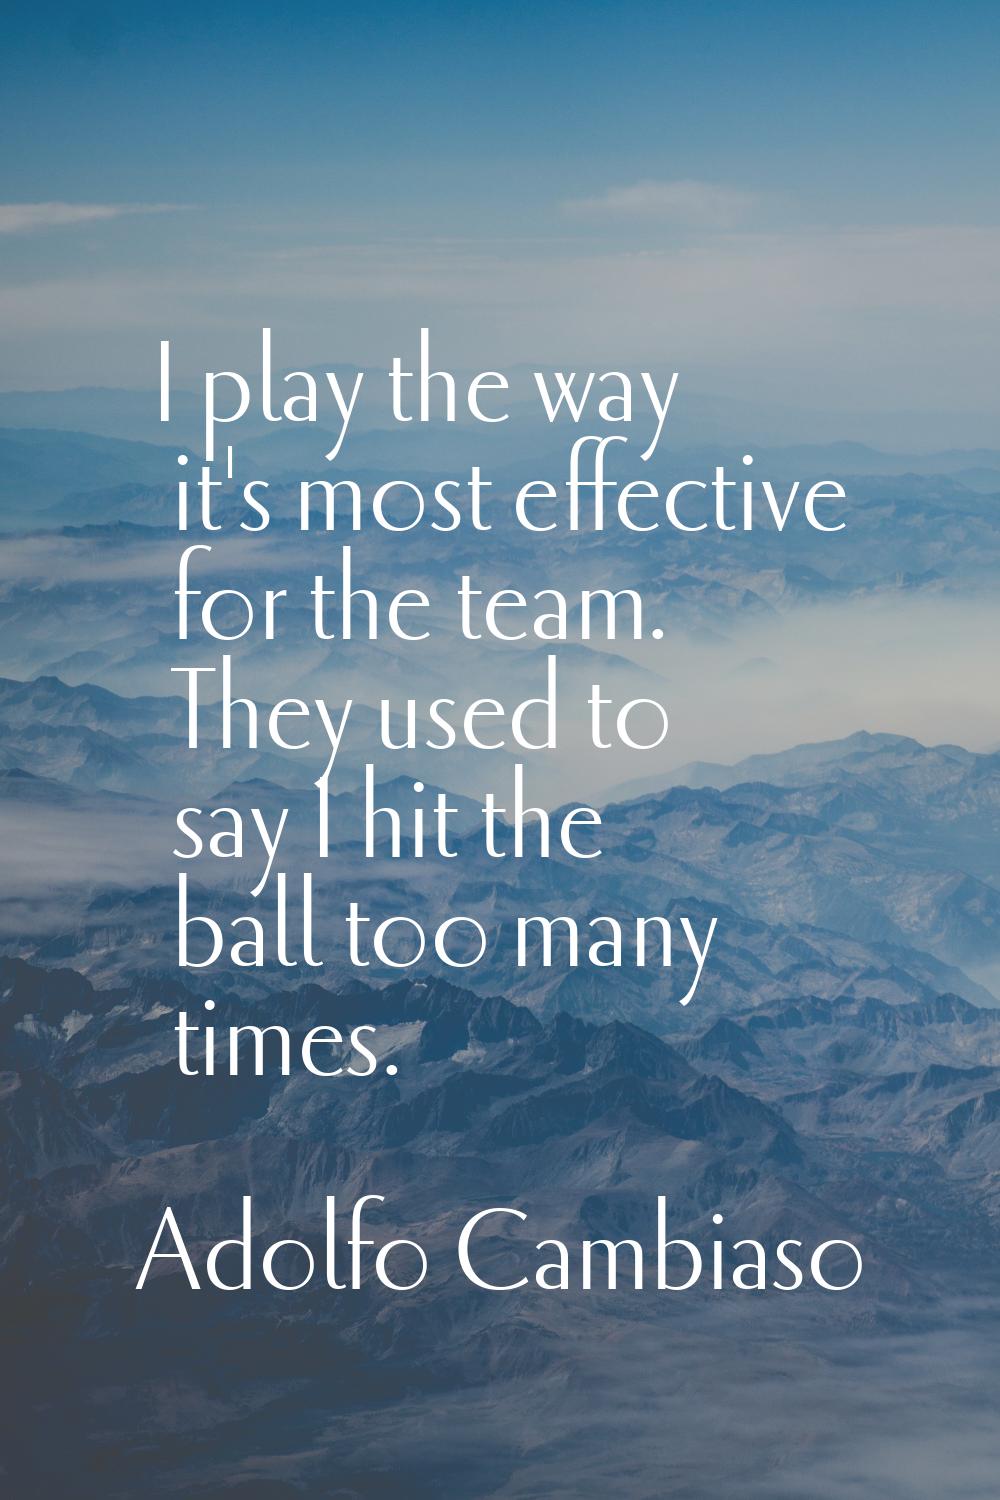 I play the way it's most effective for the team. They used to say I hit the ball too many times.